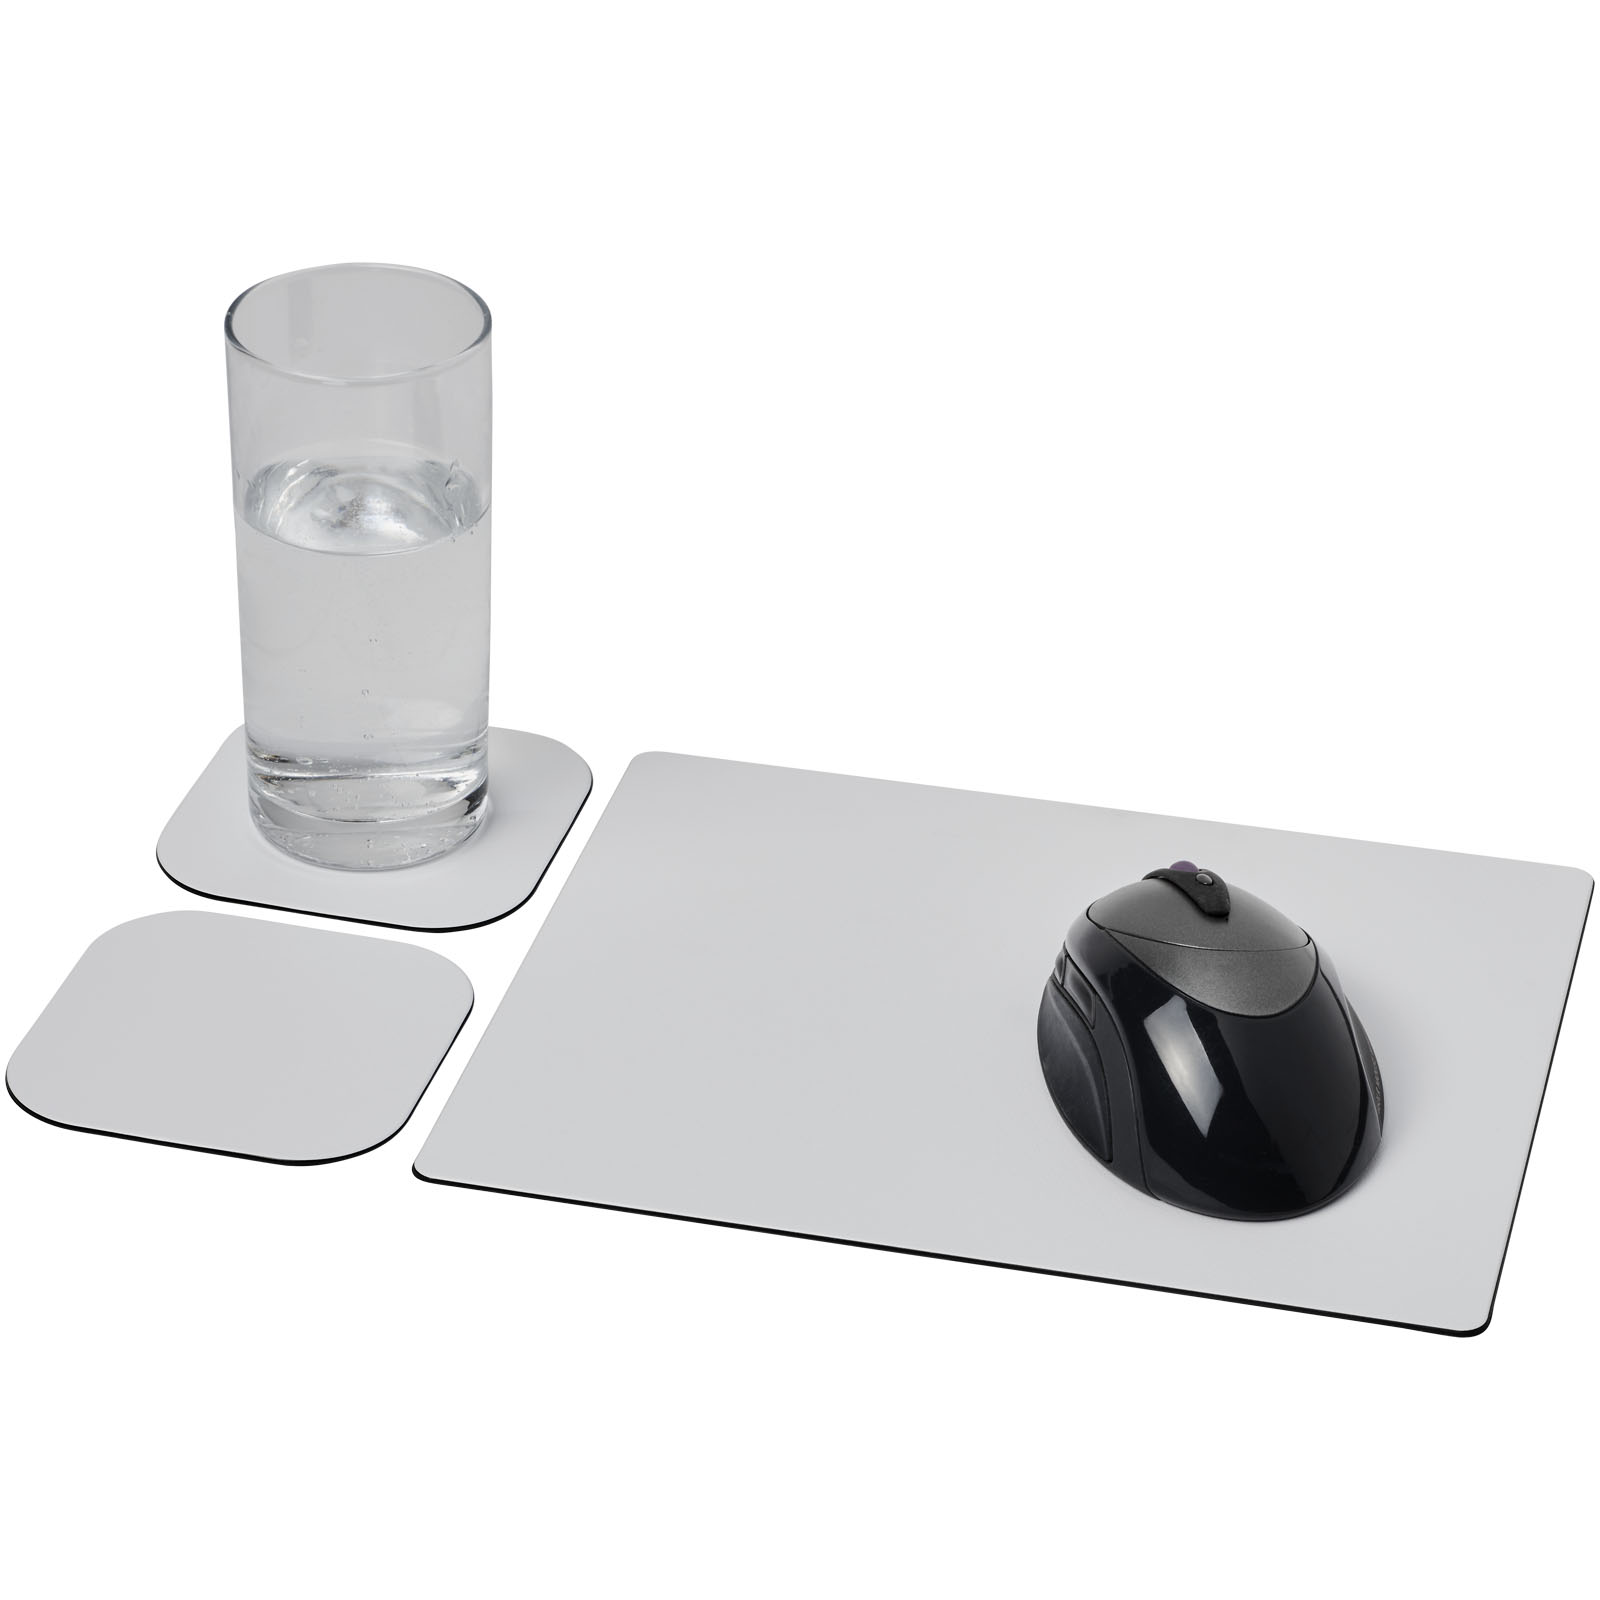 Brite-Mat Mouse Pad and Coasters Set - Cotesbach - Draycott in the Clay